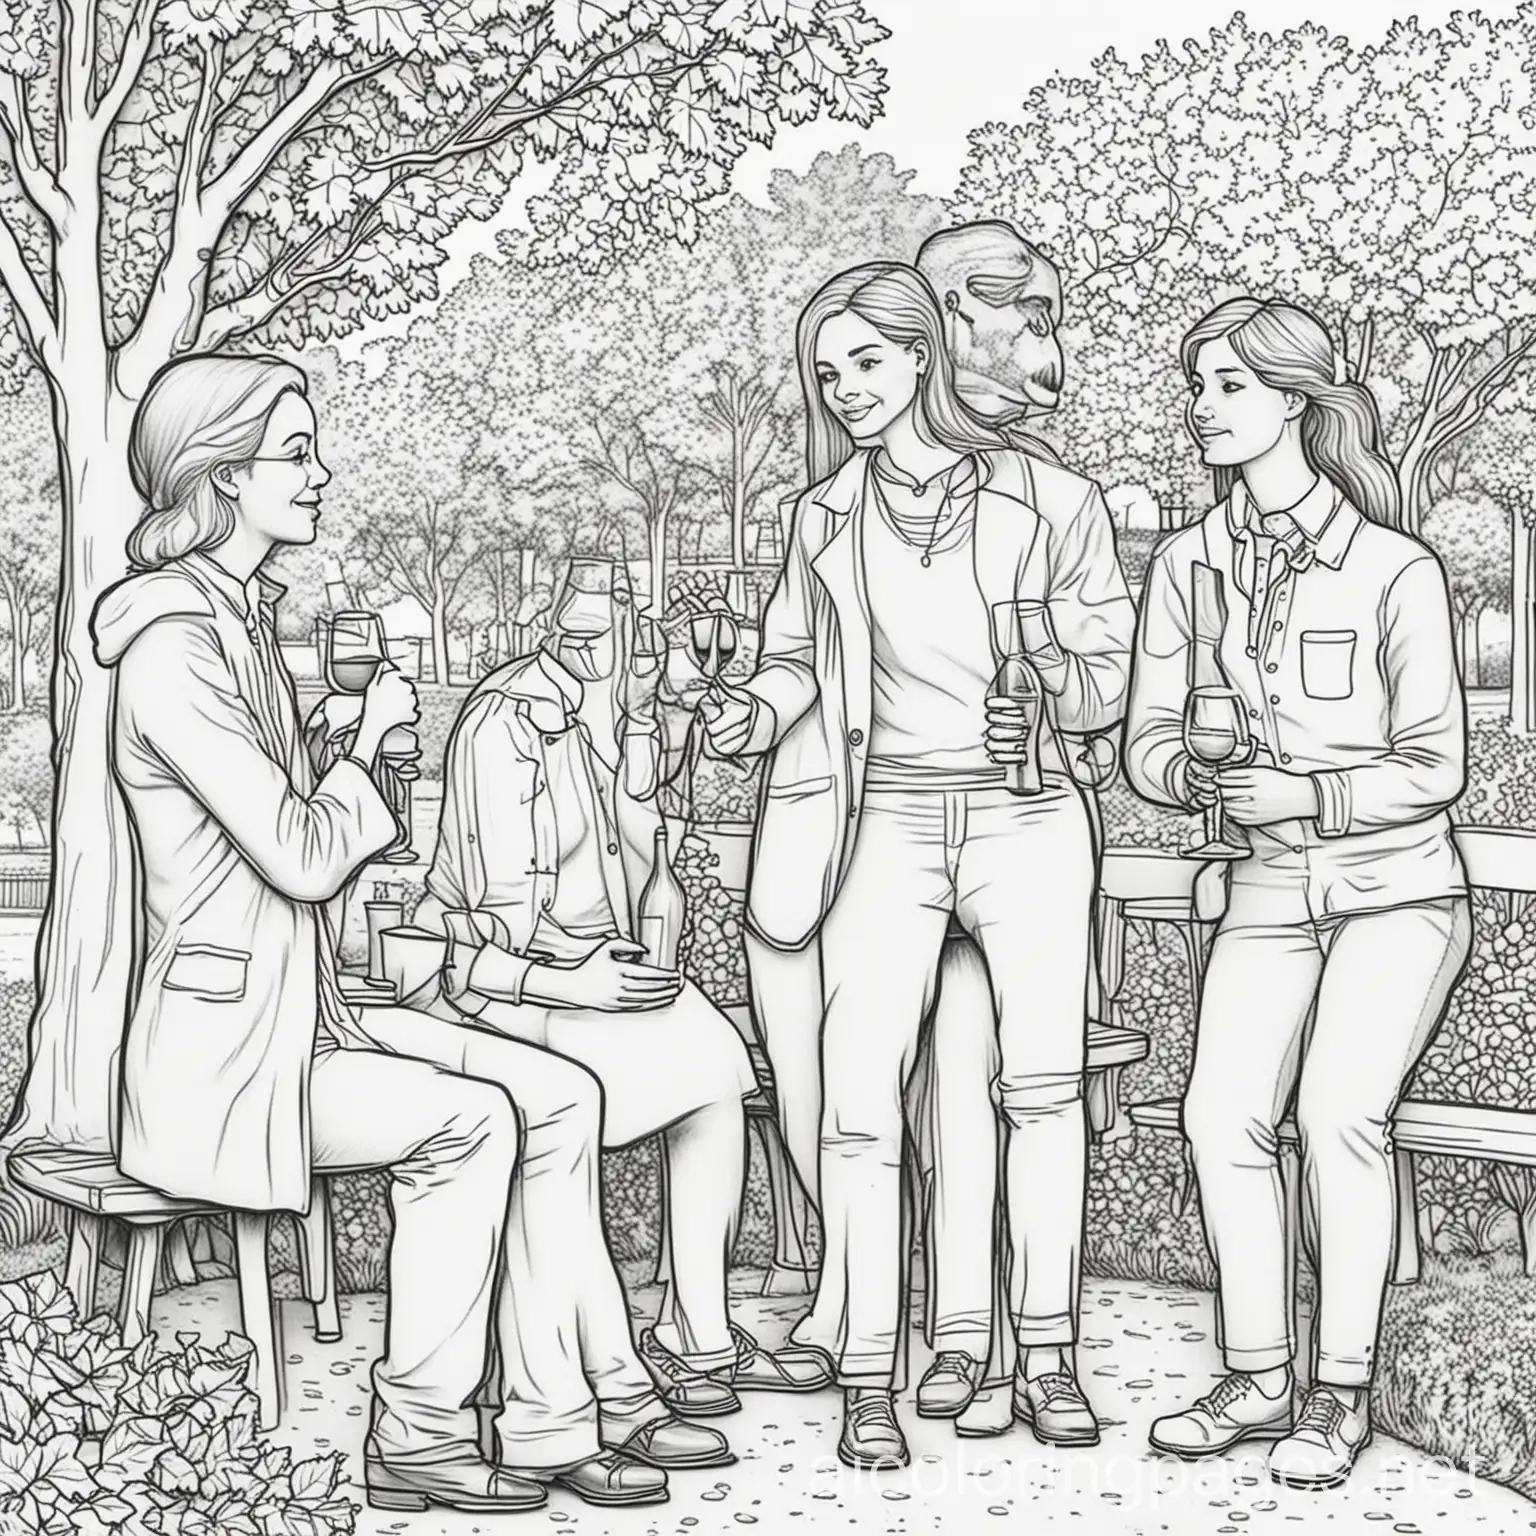 People-Drinking-Wine-in-Park-Coloring-Page